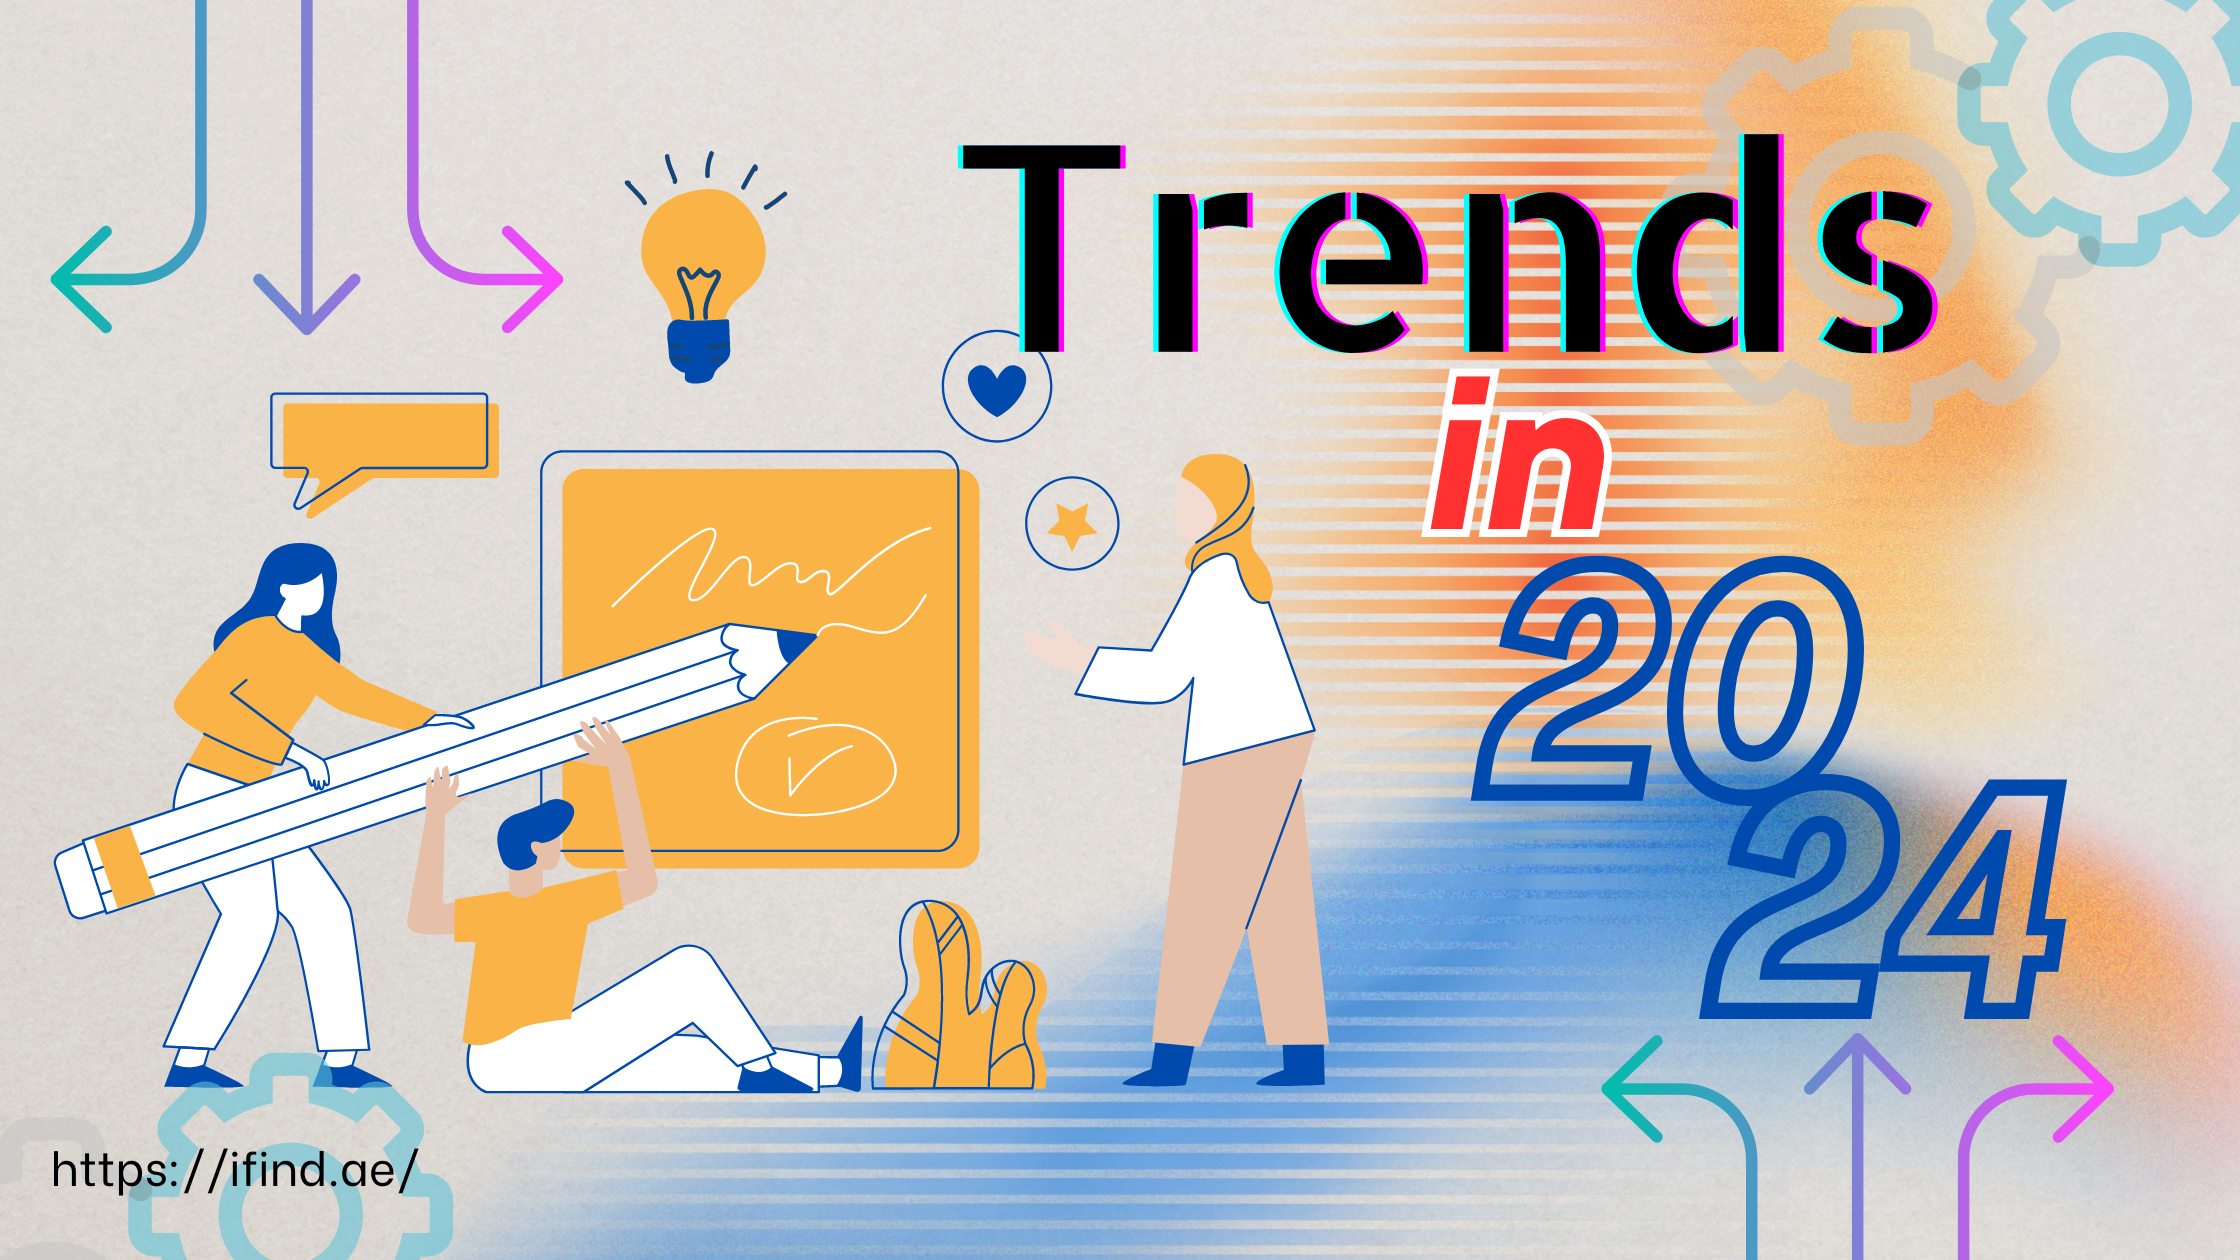 20 Expert Predictions on the Biggest Agency Trends of 2024